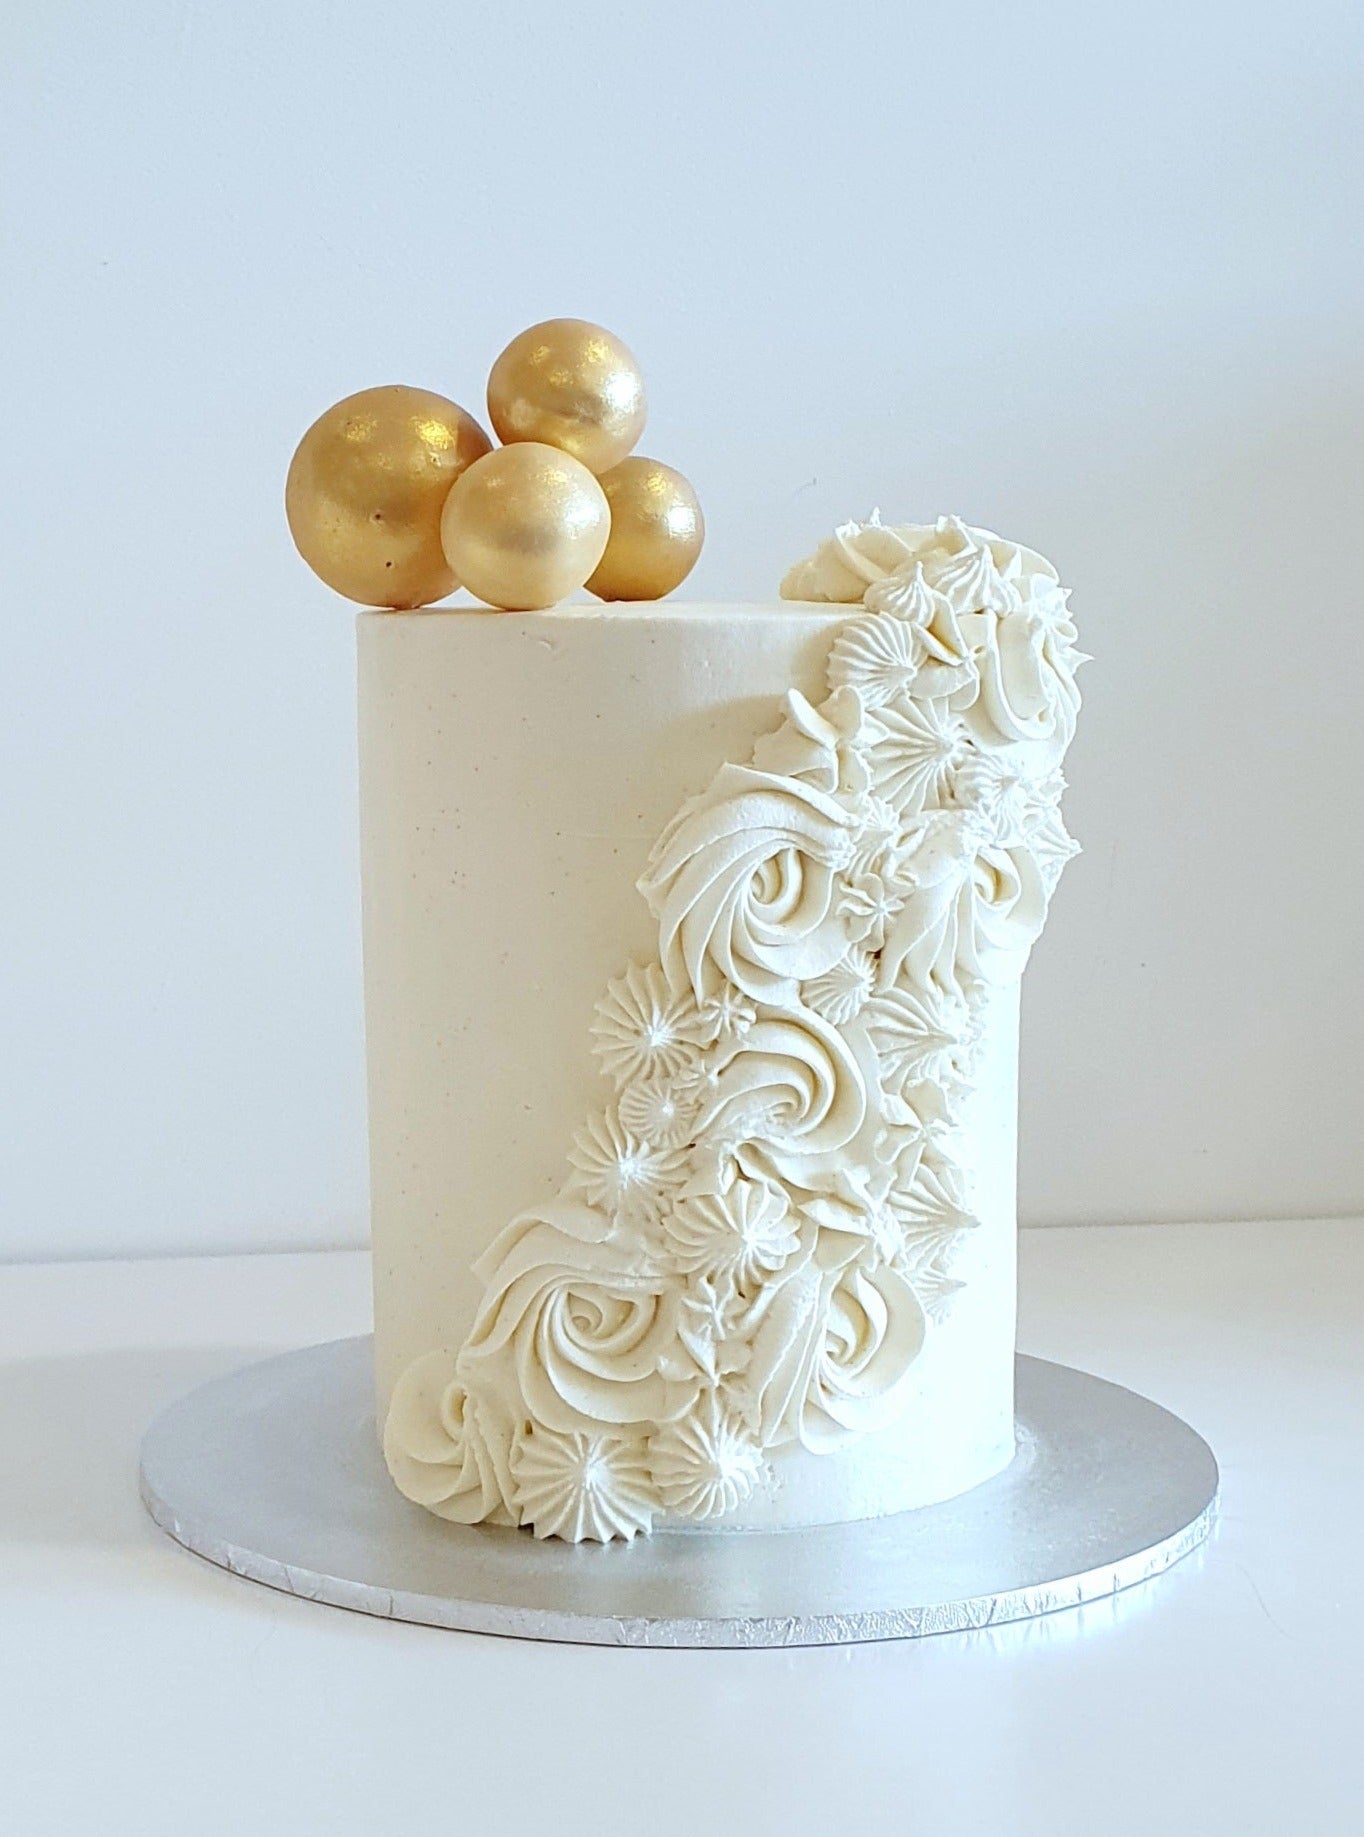 Painted Buttercream and Chocolate Spheres- Cake Tutorial - My Cake School